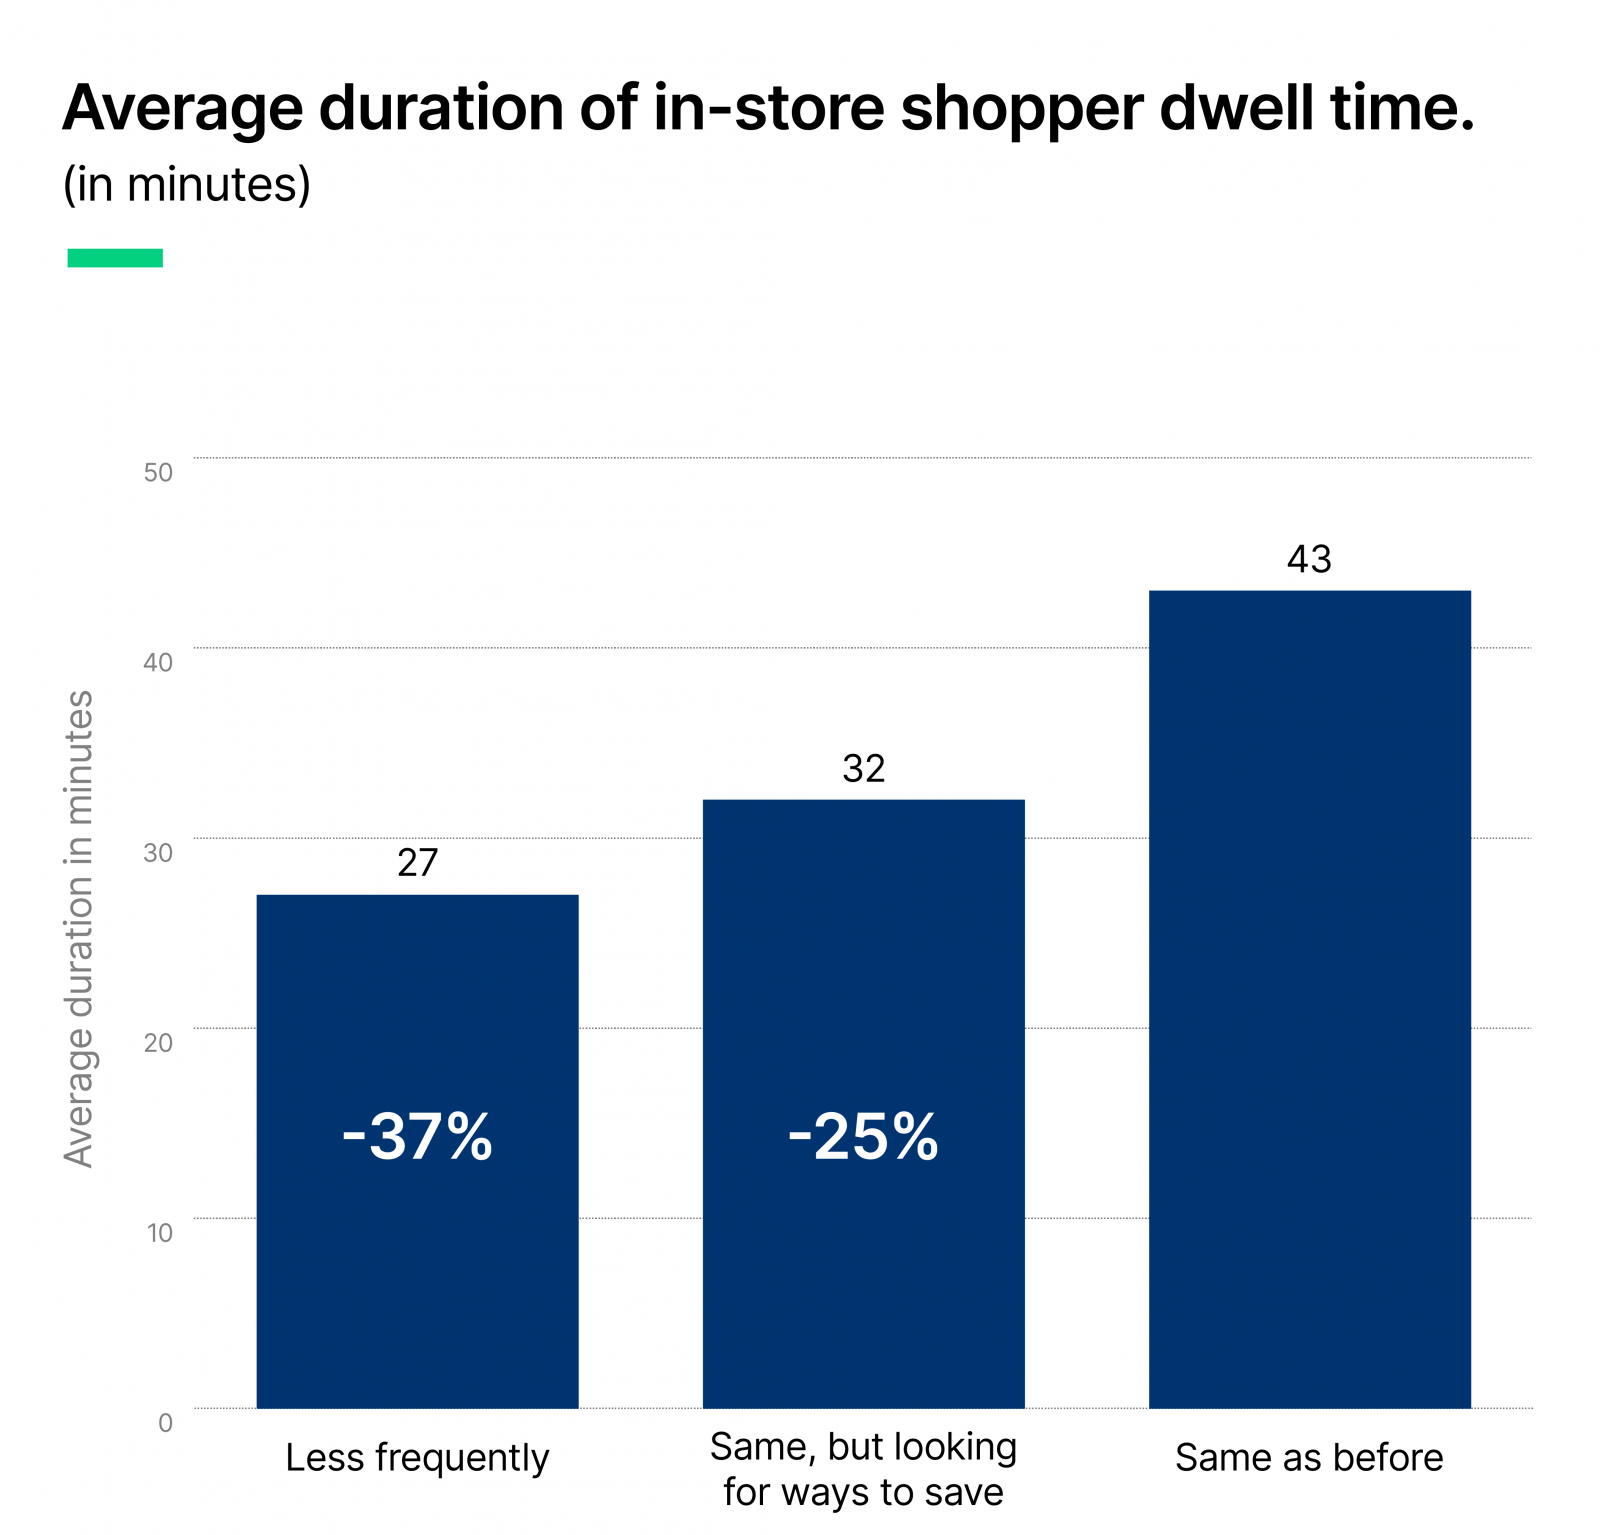 MFour sees a 37% reduction in dwell time for in-store shoppers.